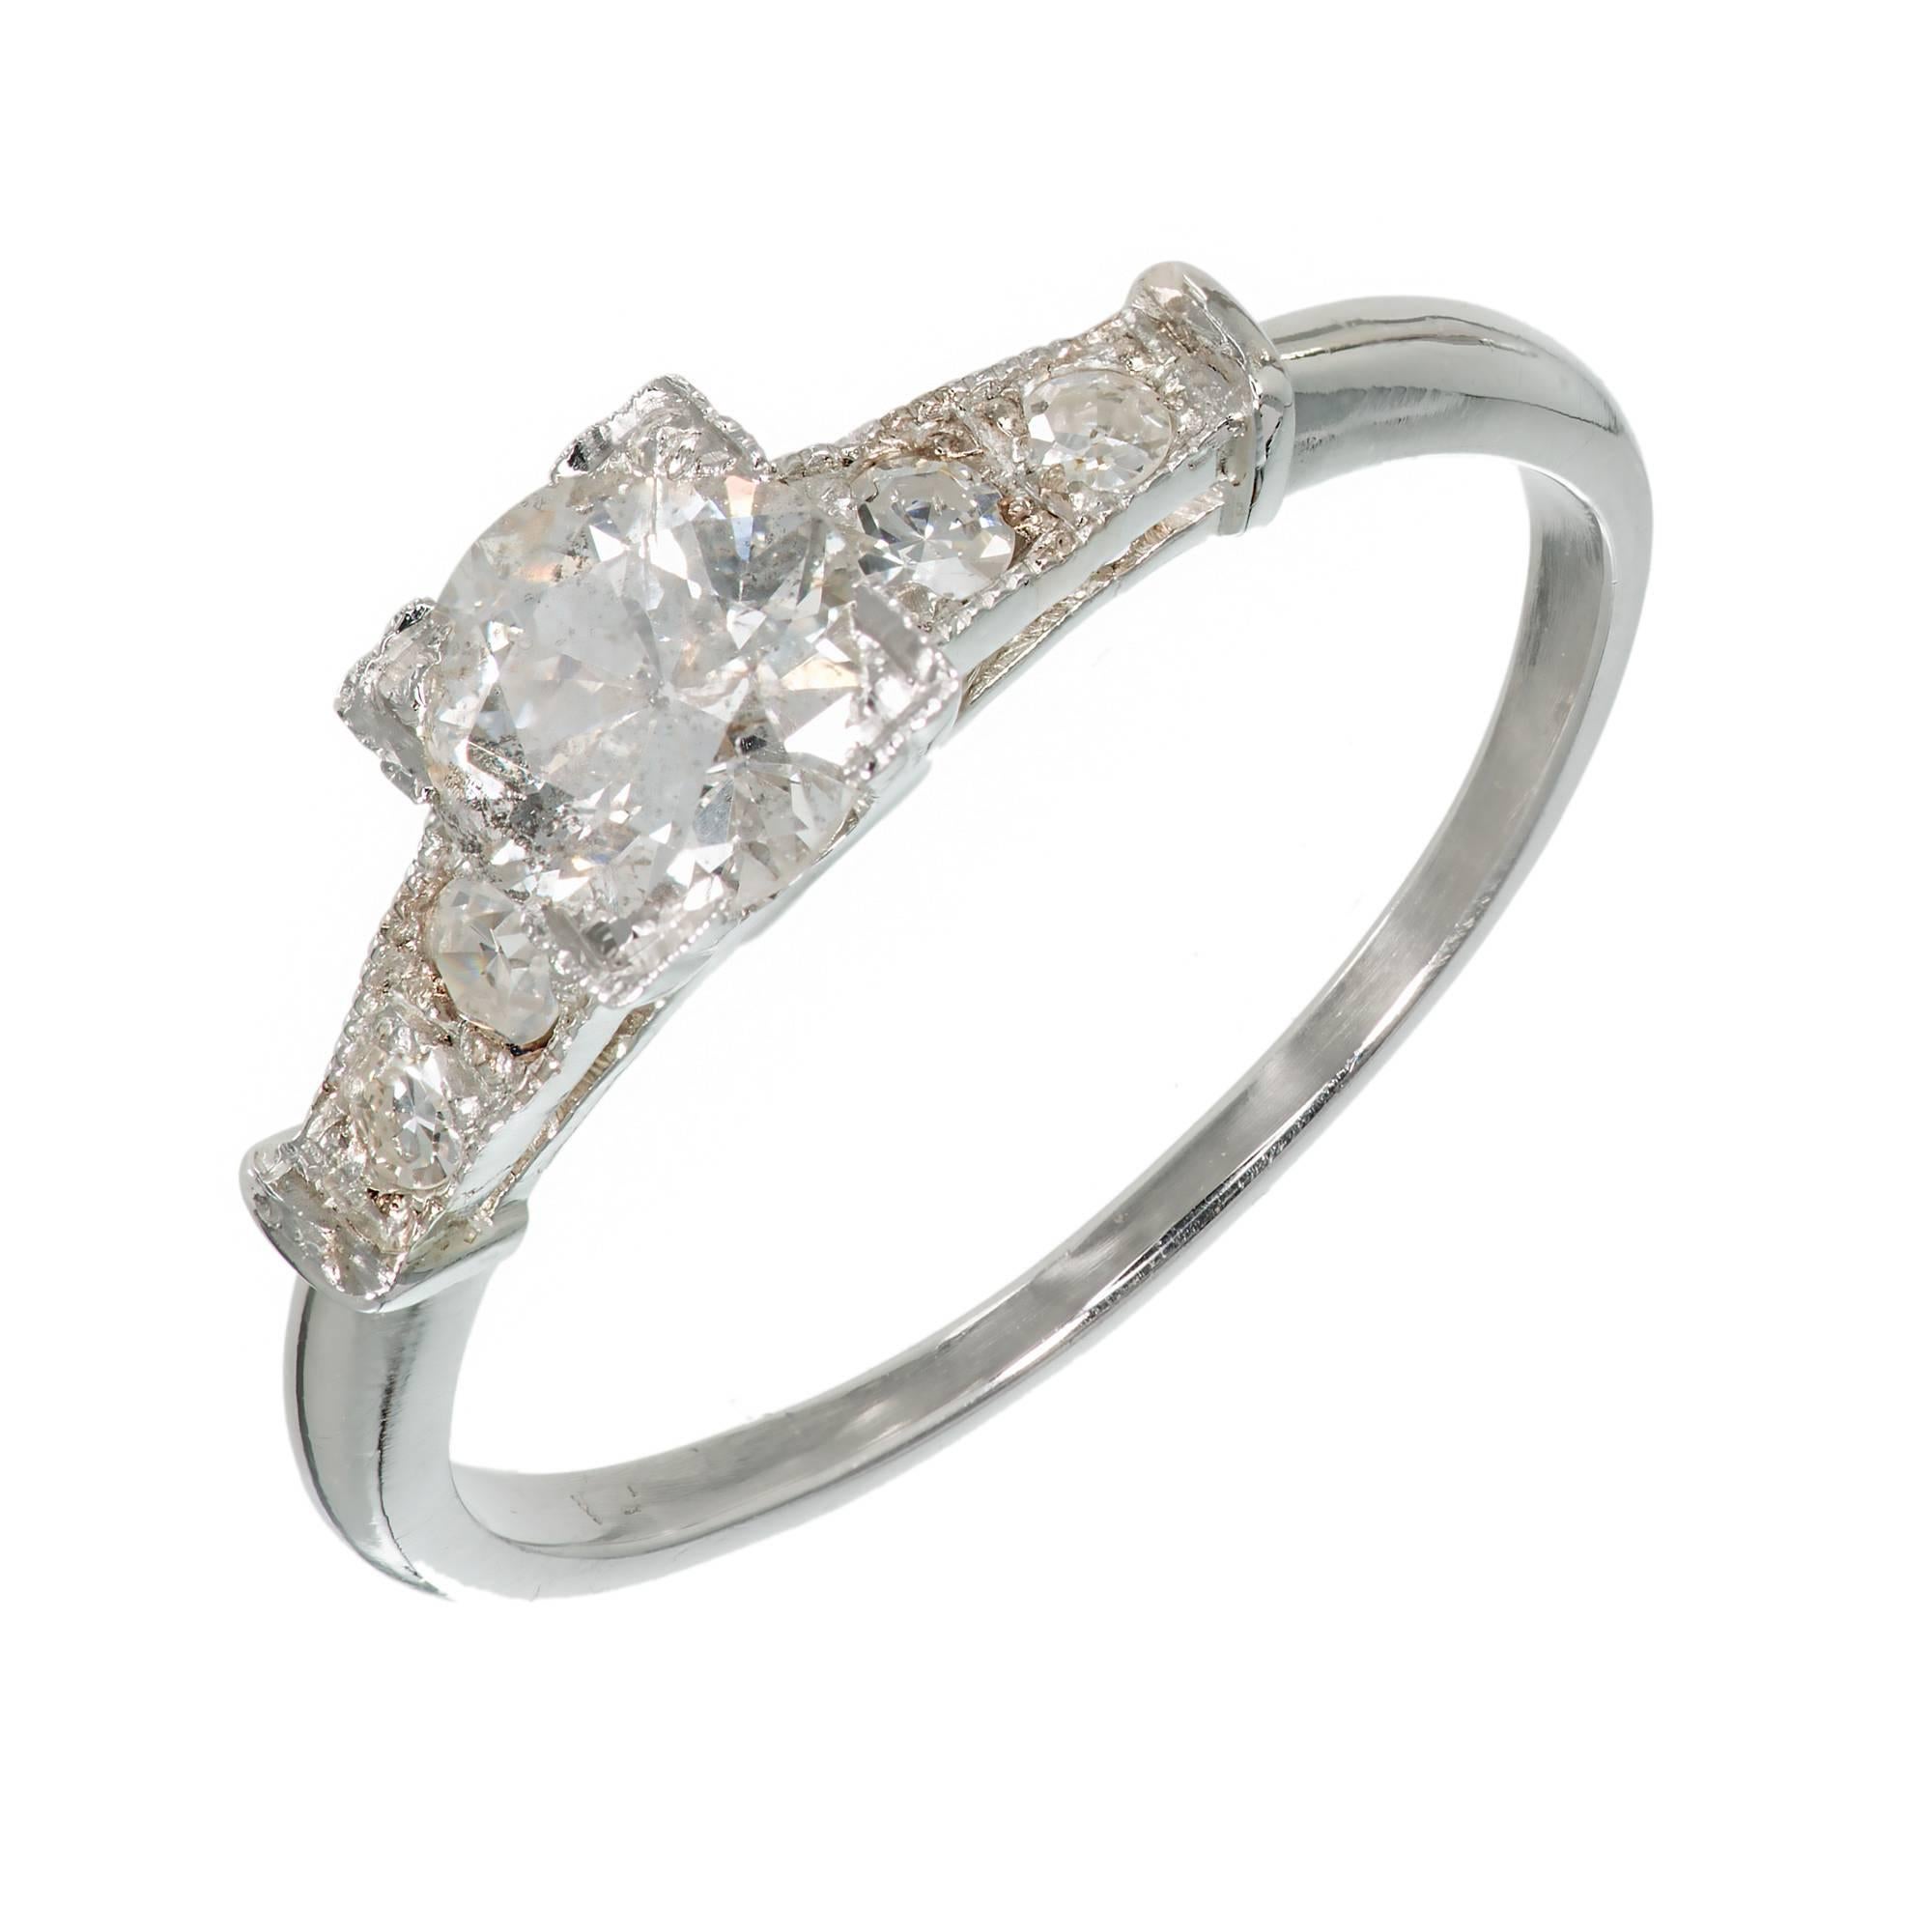  Art Deco circa 1930-1939 natural faint gray diamond platinum engagement ring with a hint of pink overtone. Original 1940's Art Deco mounting.

1 GIA certified round diamond .73cts, 5.71 x 5.81 x 3.58mm natural faint gray transitional cut SI2